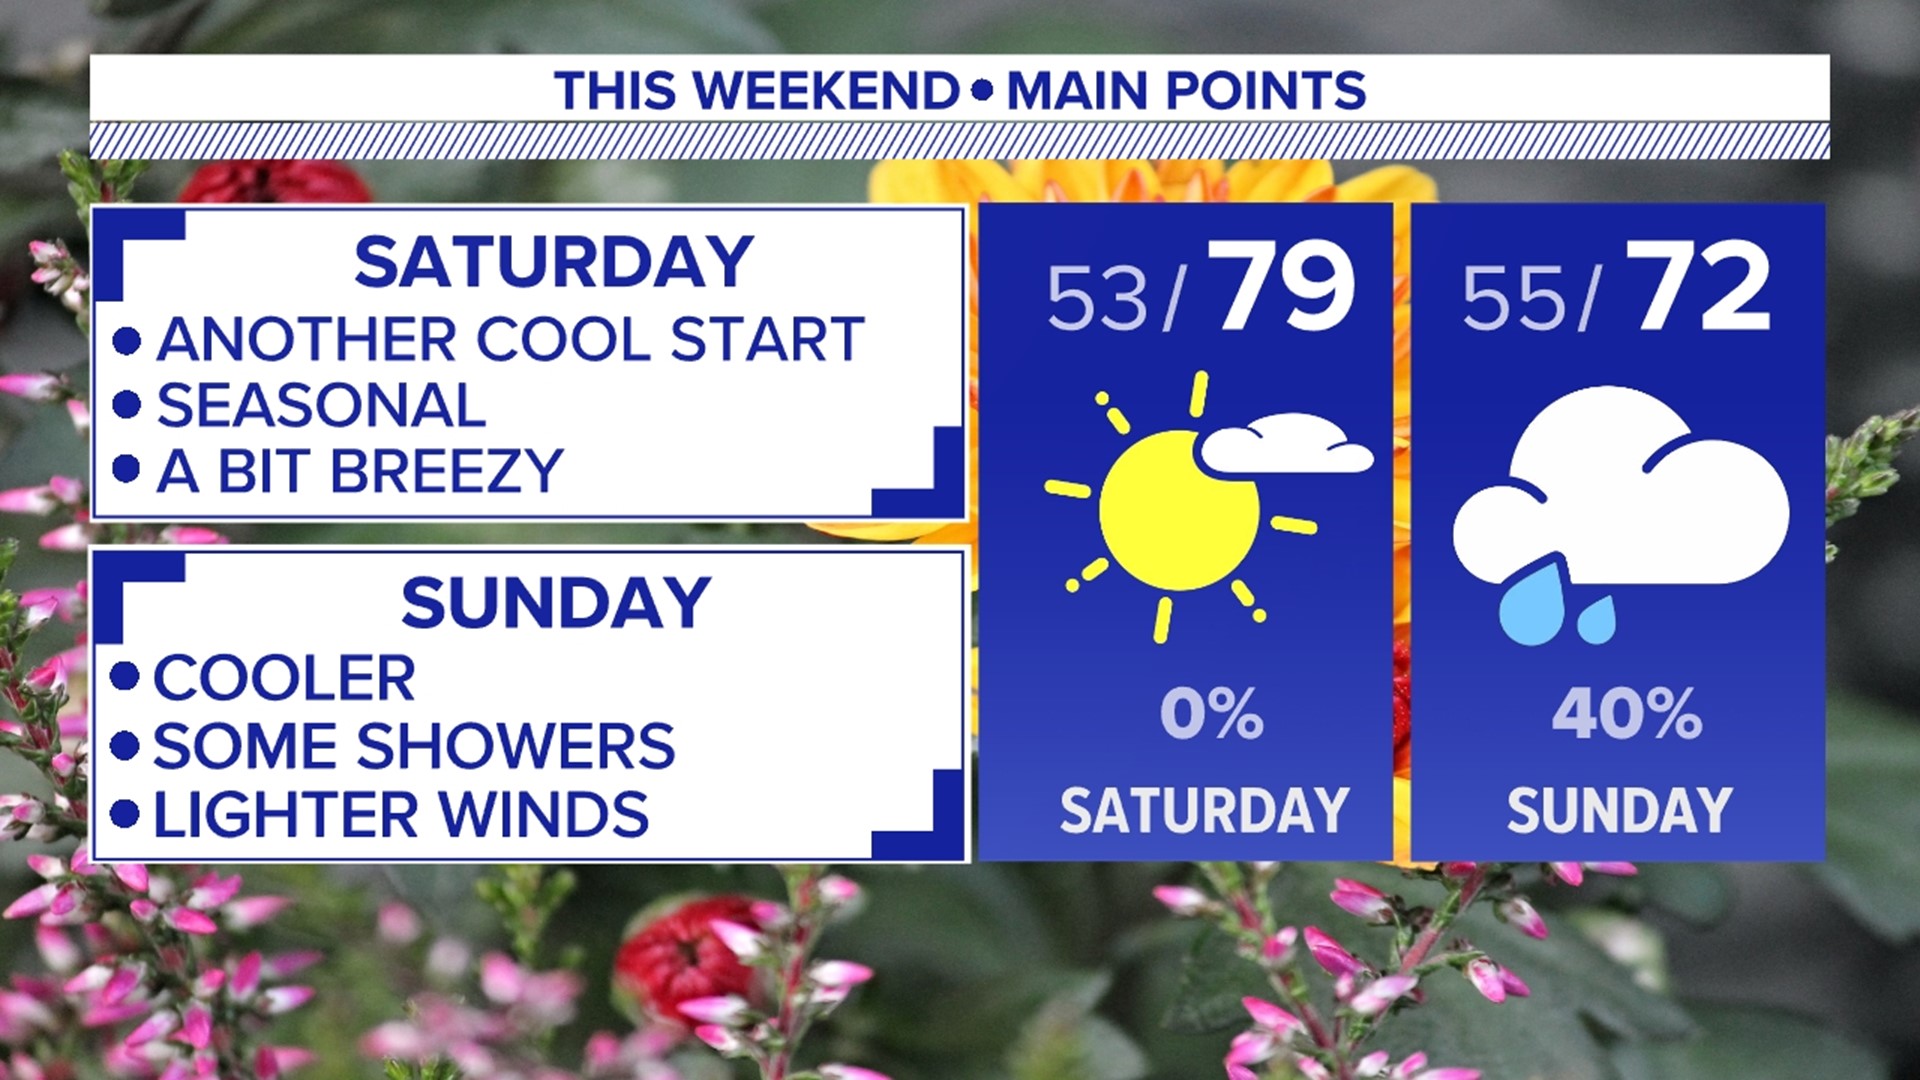 We are tracking sun, seasonal highs, rain and cooler temperatures - all in the same weekend!